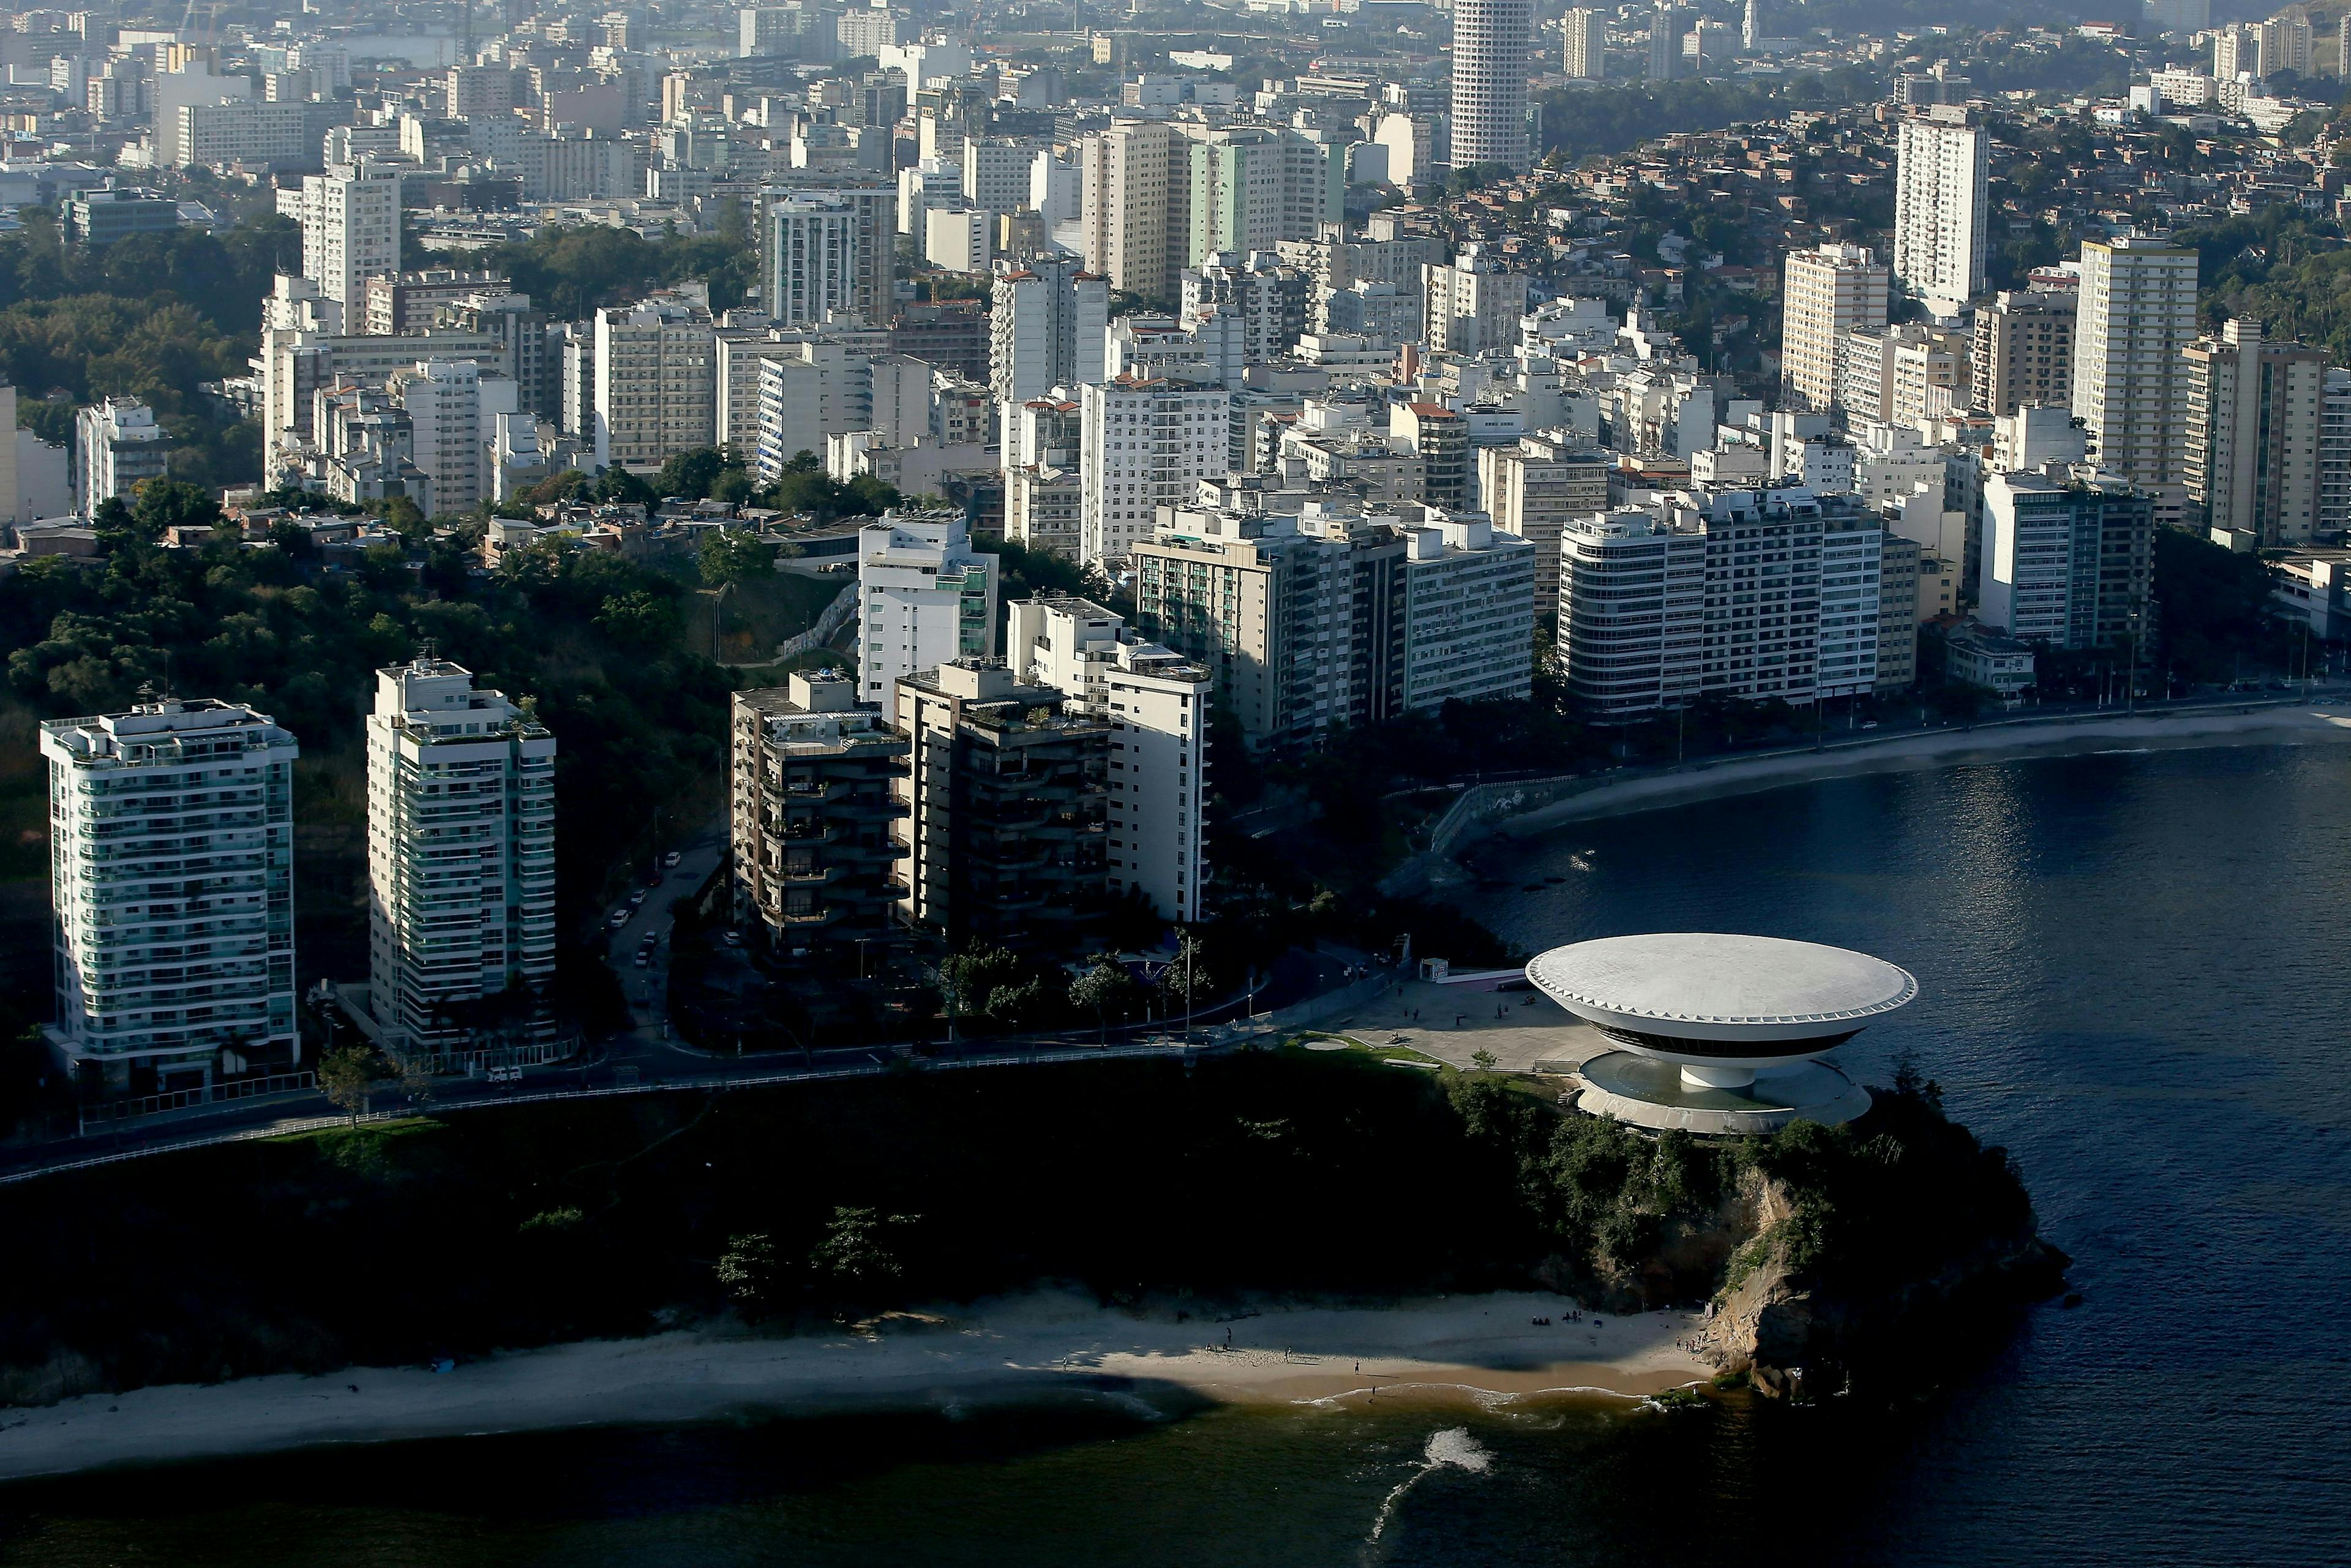 niteroi outdoors nature landscape scenery aerial view urban building town city